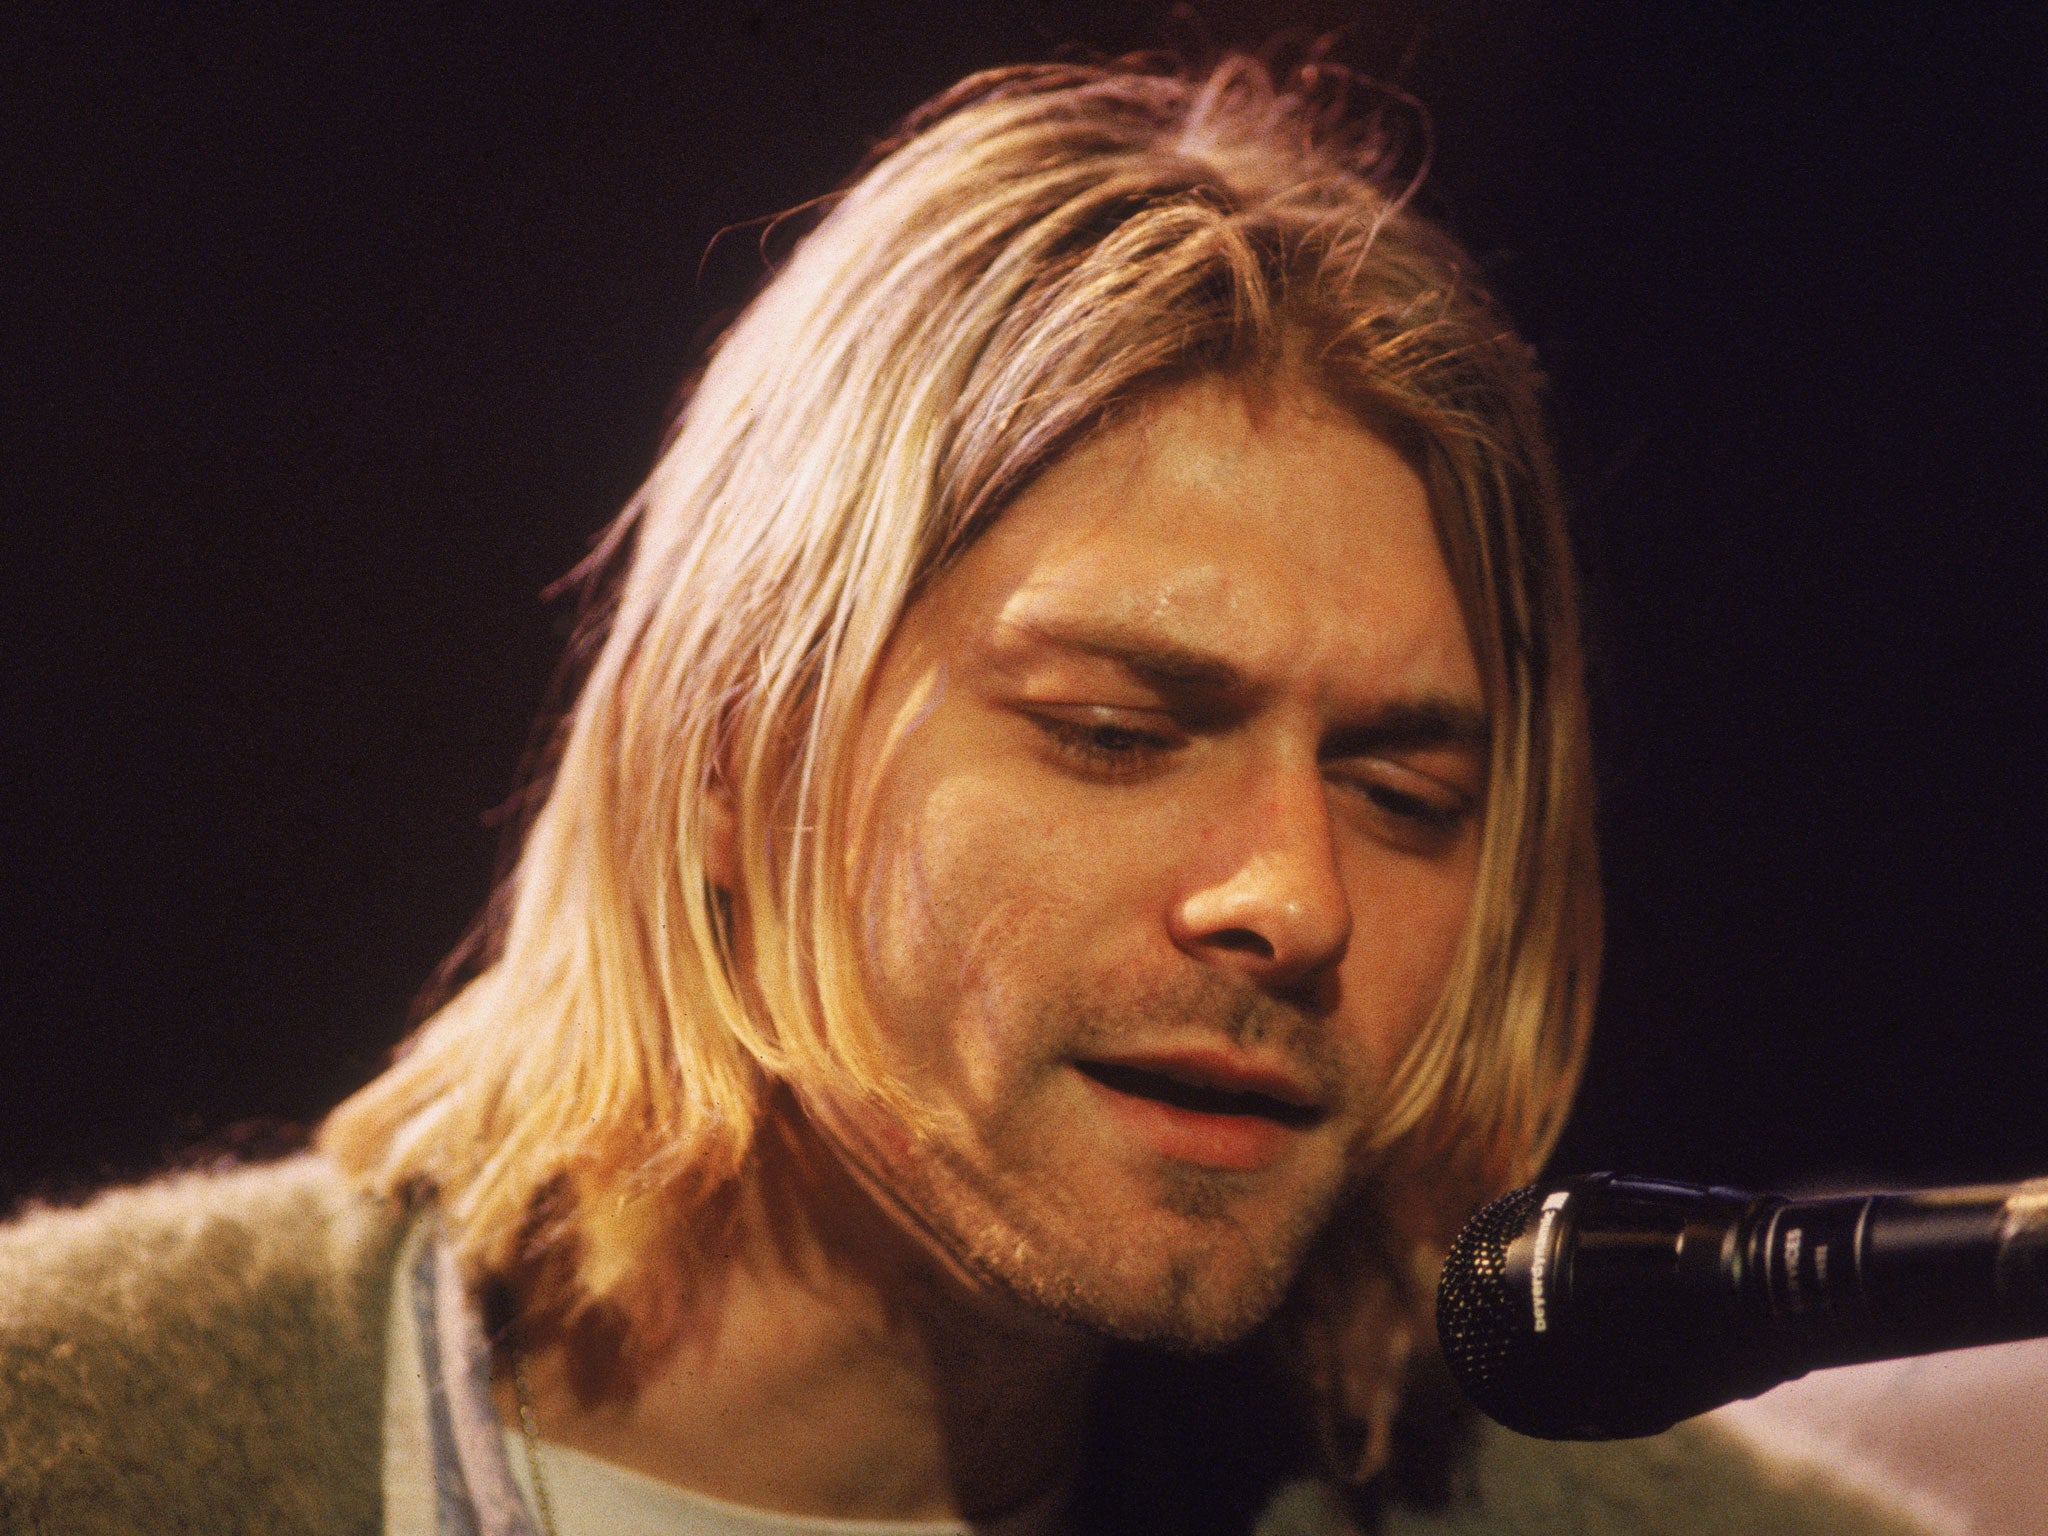 Kurt Cobain, seen here performing for an MTV Unplugged special in 1993, thought he was gay as a teenager, a newly unearthed interview has revealed